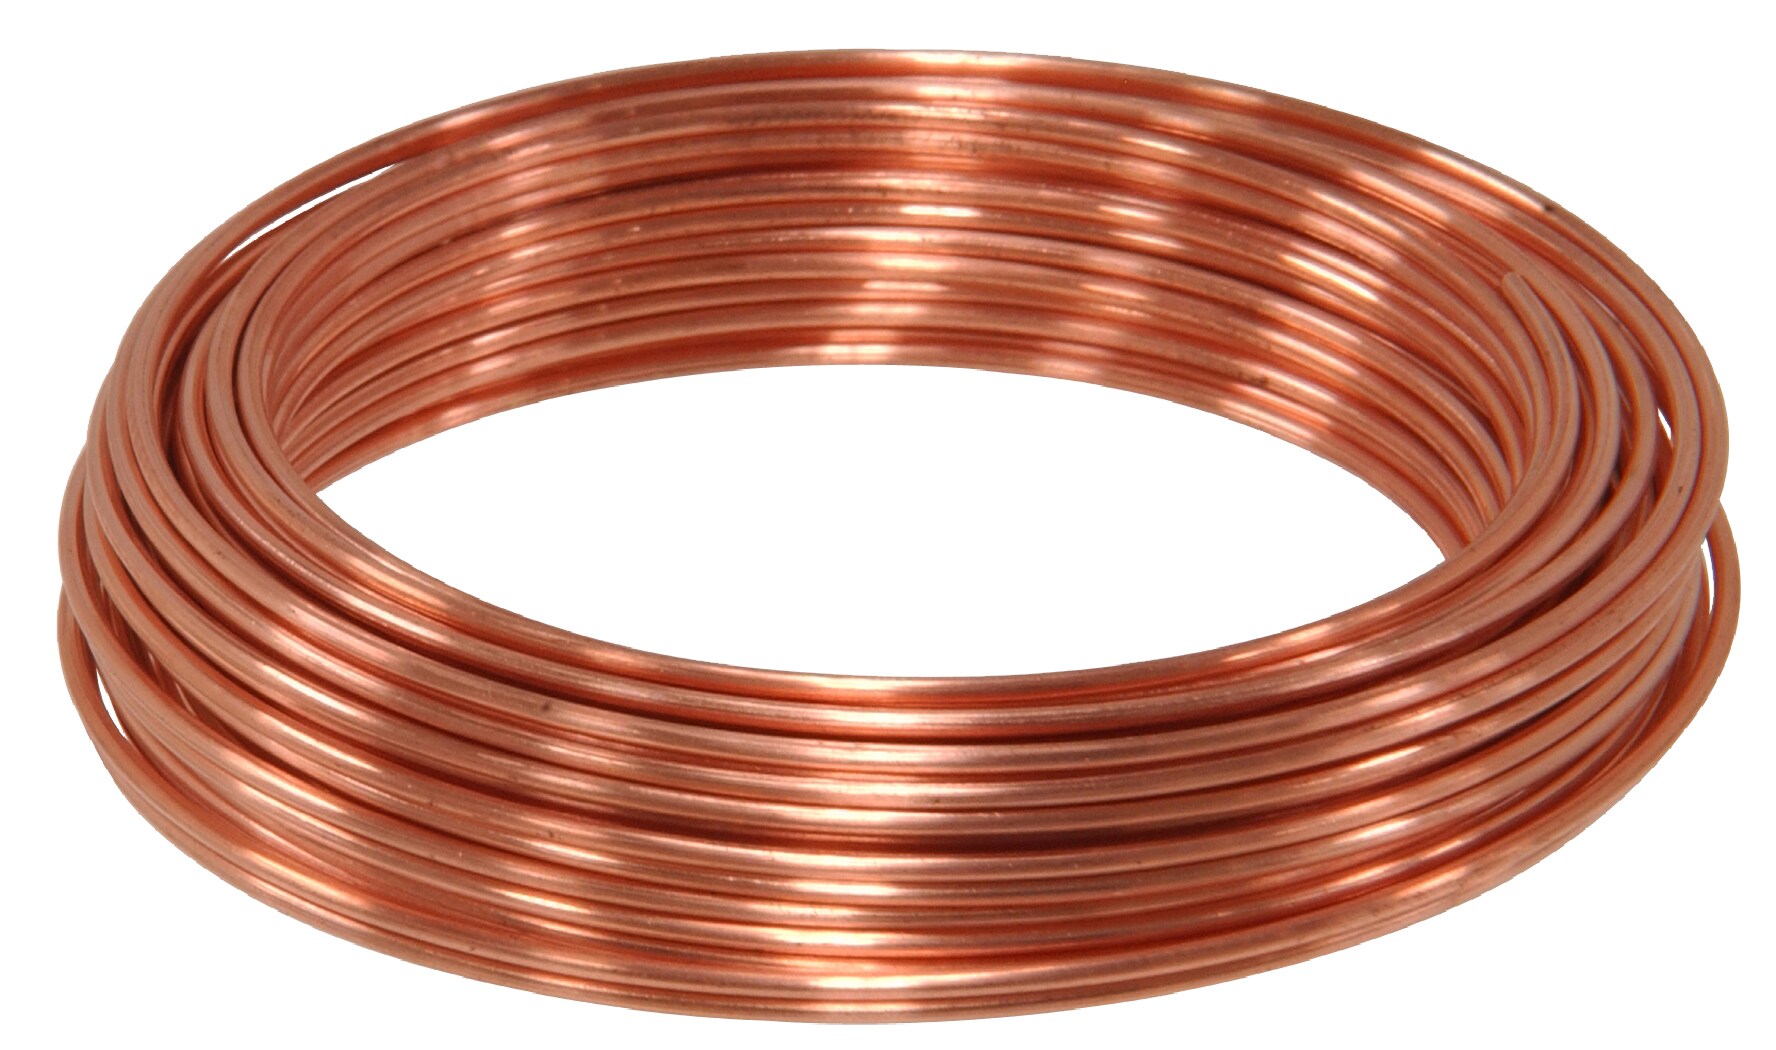 OOK 25-ft 18-gauge COPPER WIRE at